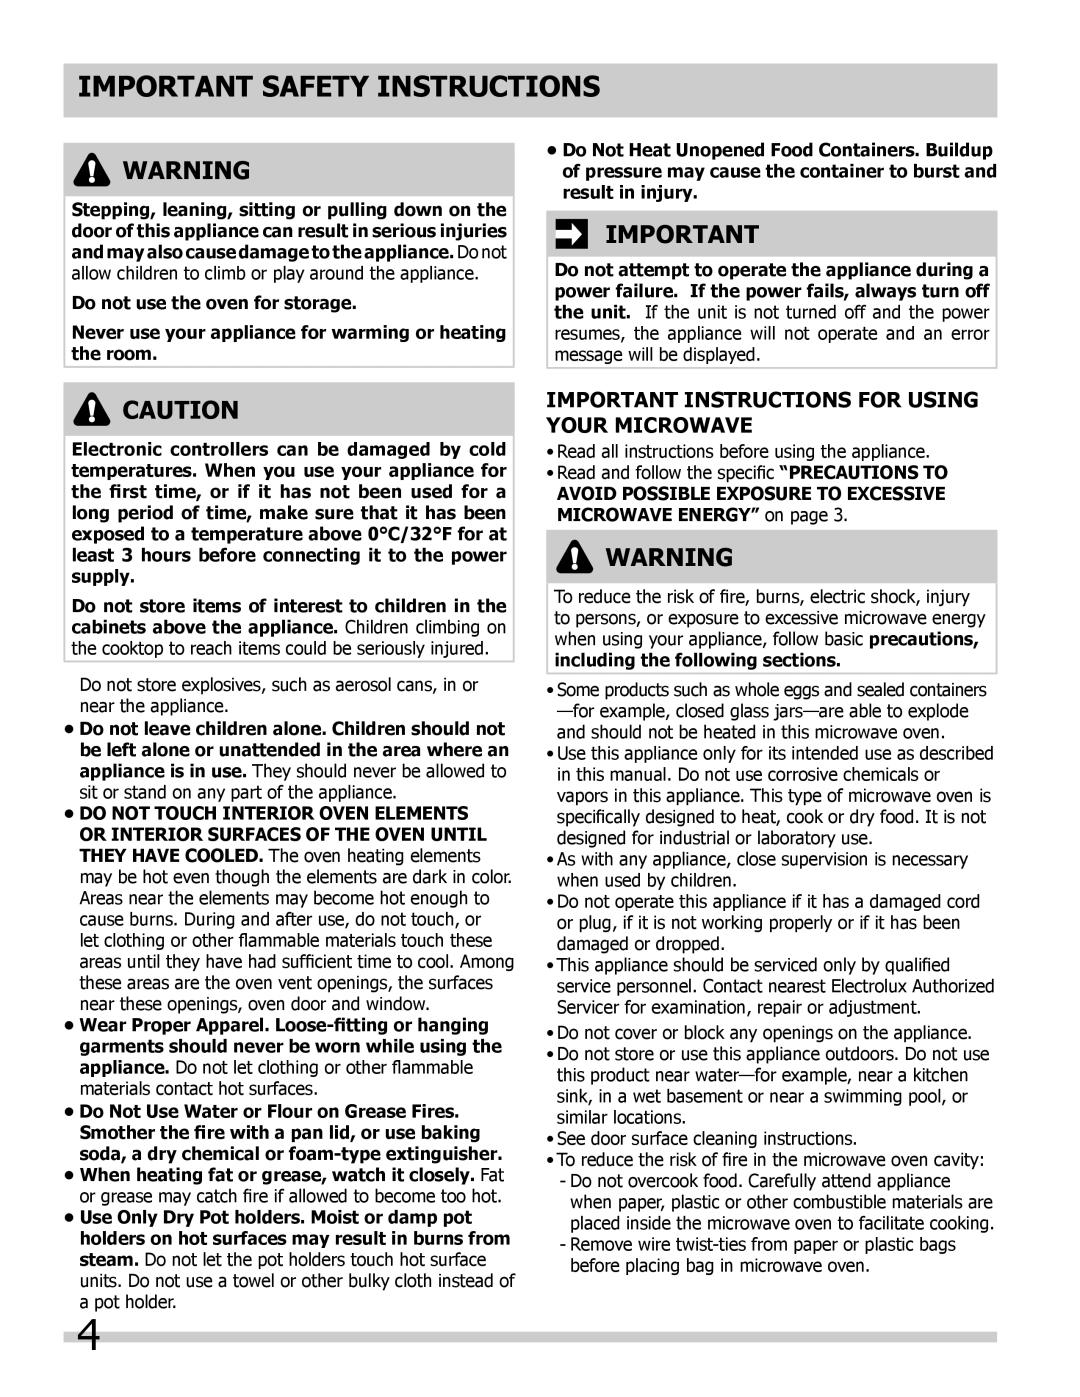 Frigidaire 318205300 Important Instructions For Using Your Microwave, Important Safety Instructions 